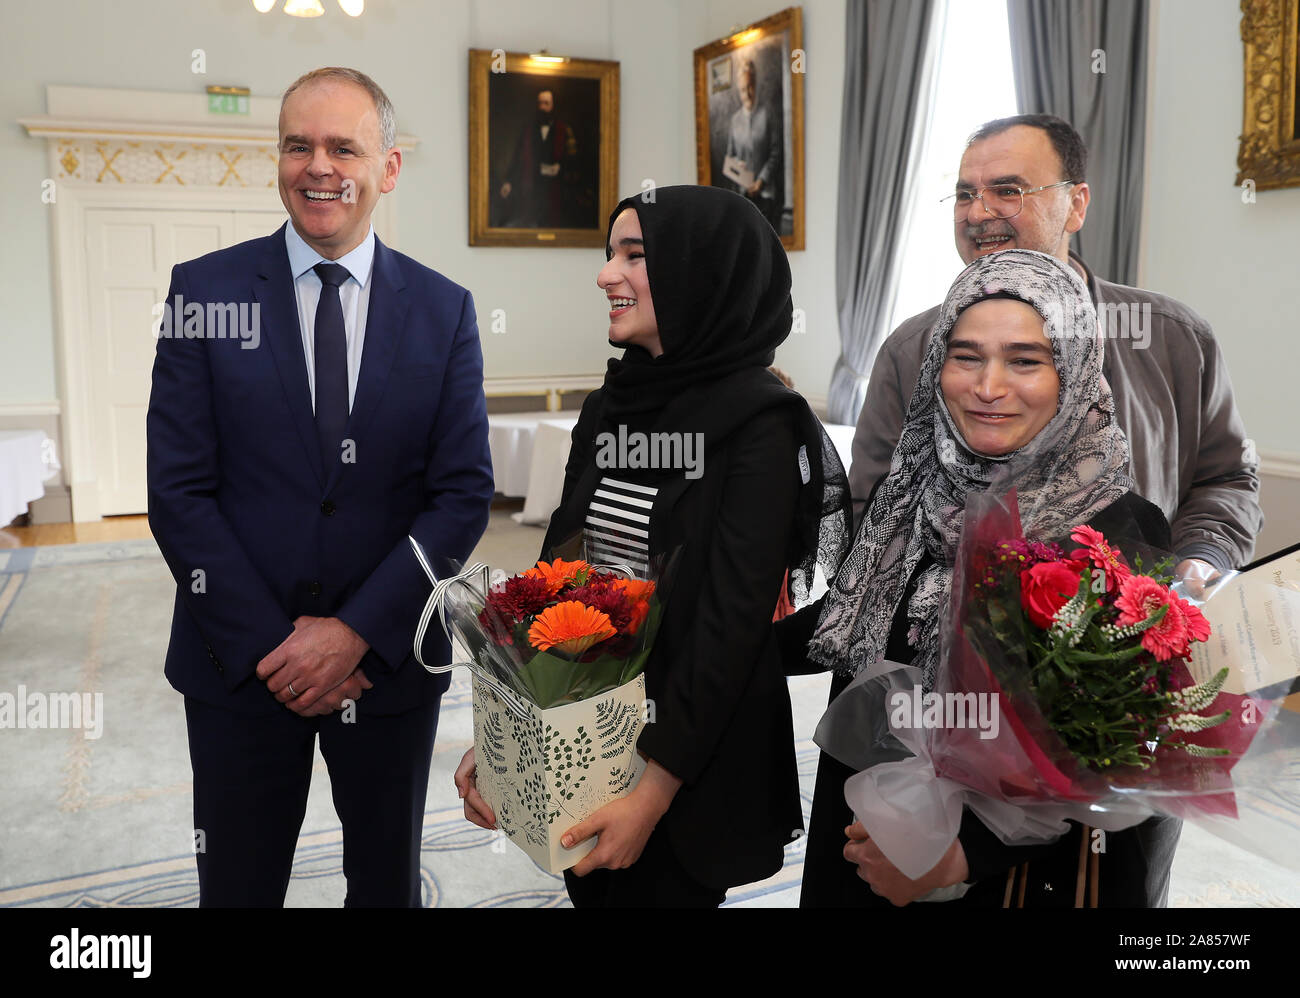 Minister for Education Joe McHugh (left) speaking with RCSI medical student Suaad Alshleh (second left), her mother We Sam Jouma and father Issam Alshleh at the Royal College of Surgeons Ireland in Dublin. Suaad was presented with the inaugral Professor William C Campbell Bursary which recognises the work of the Donegal Nobel Prize winner. Stock Photo